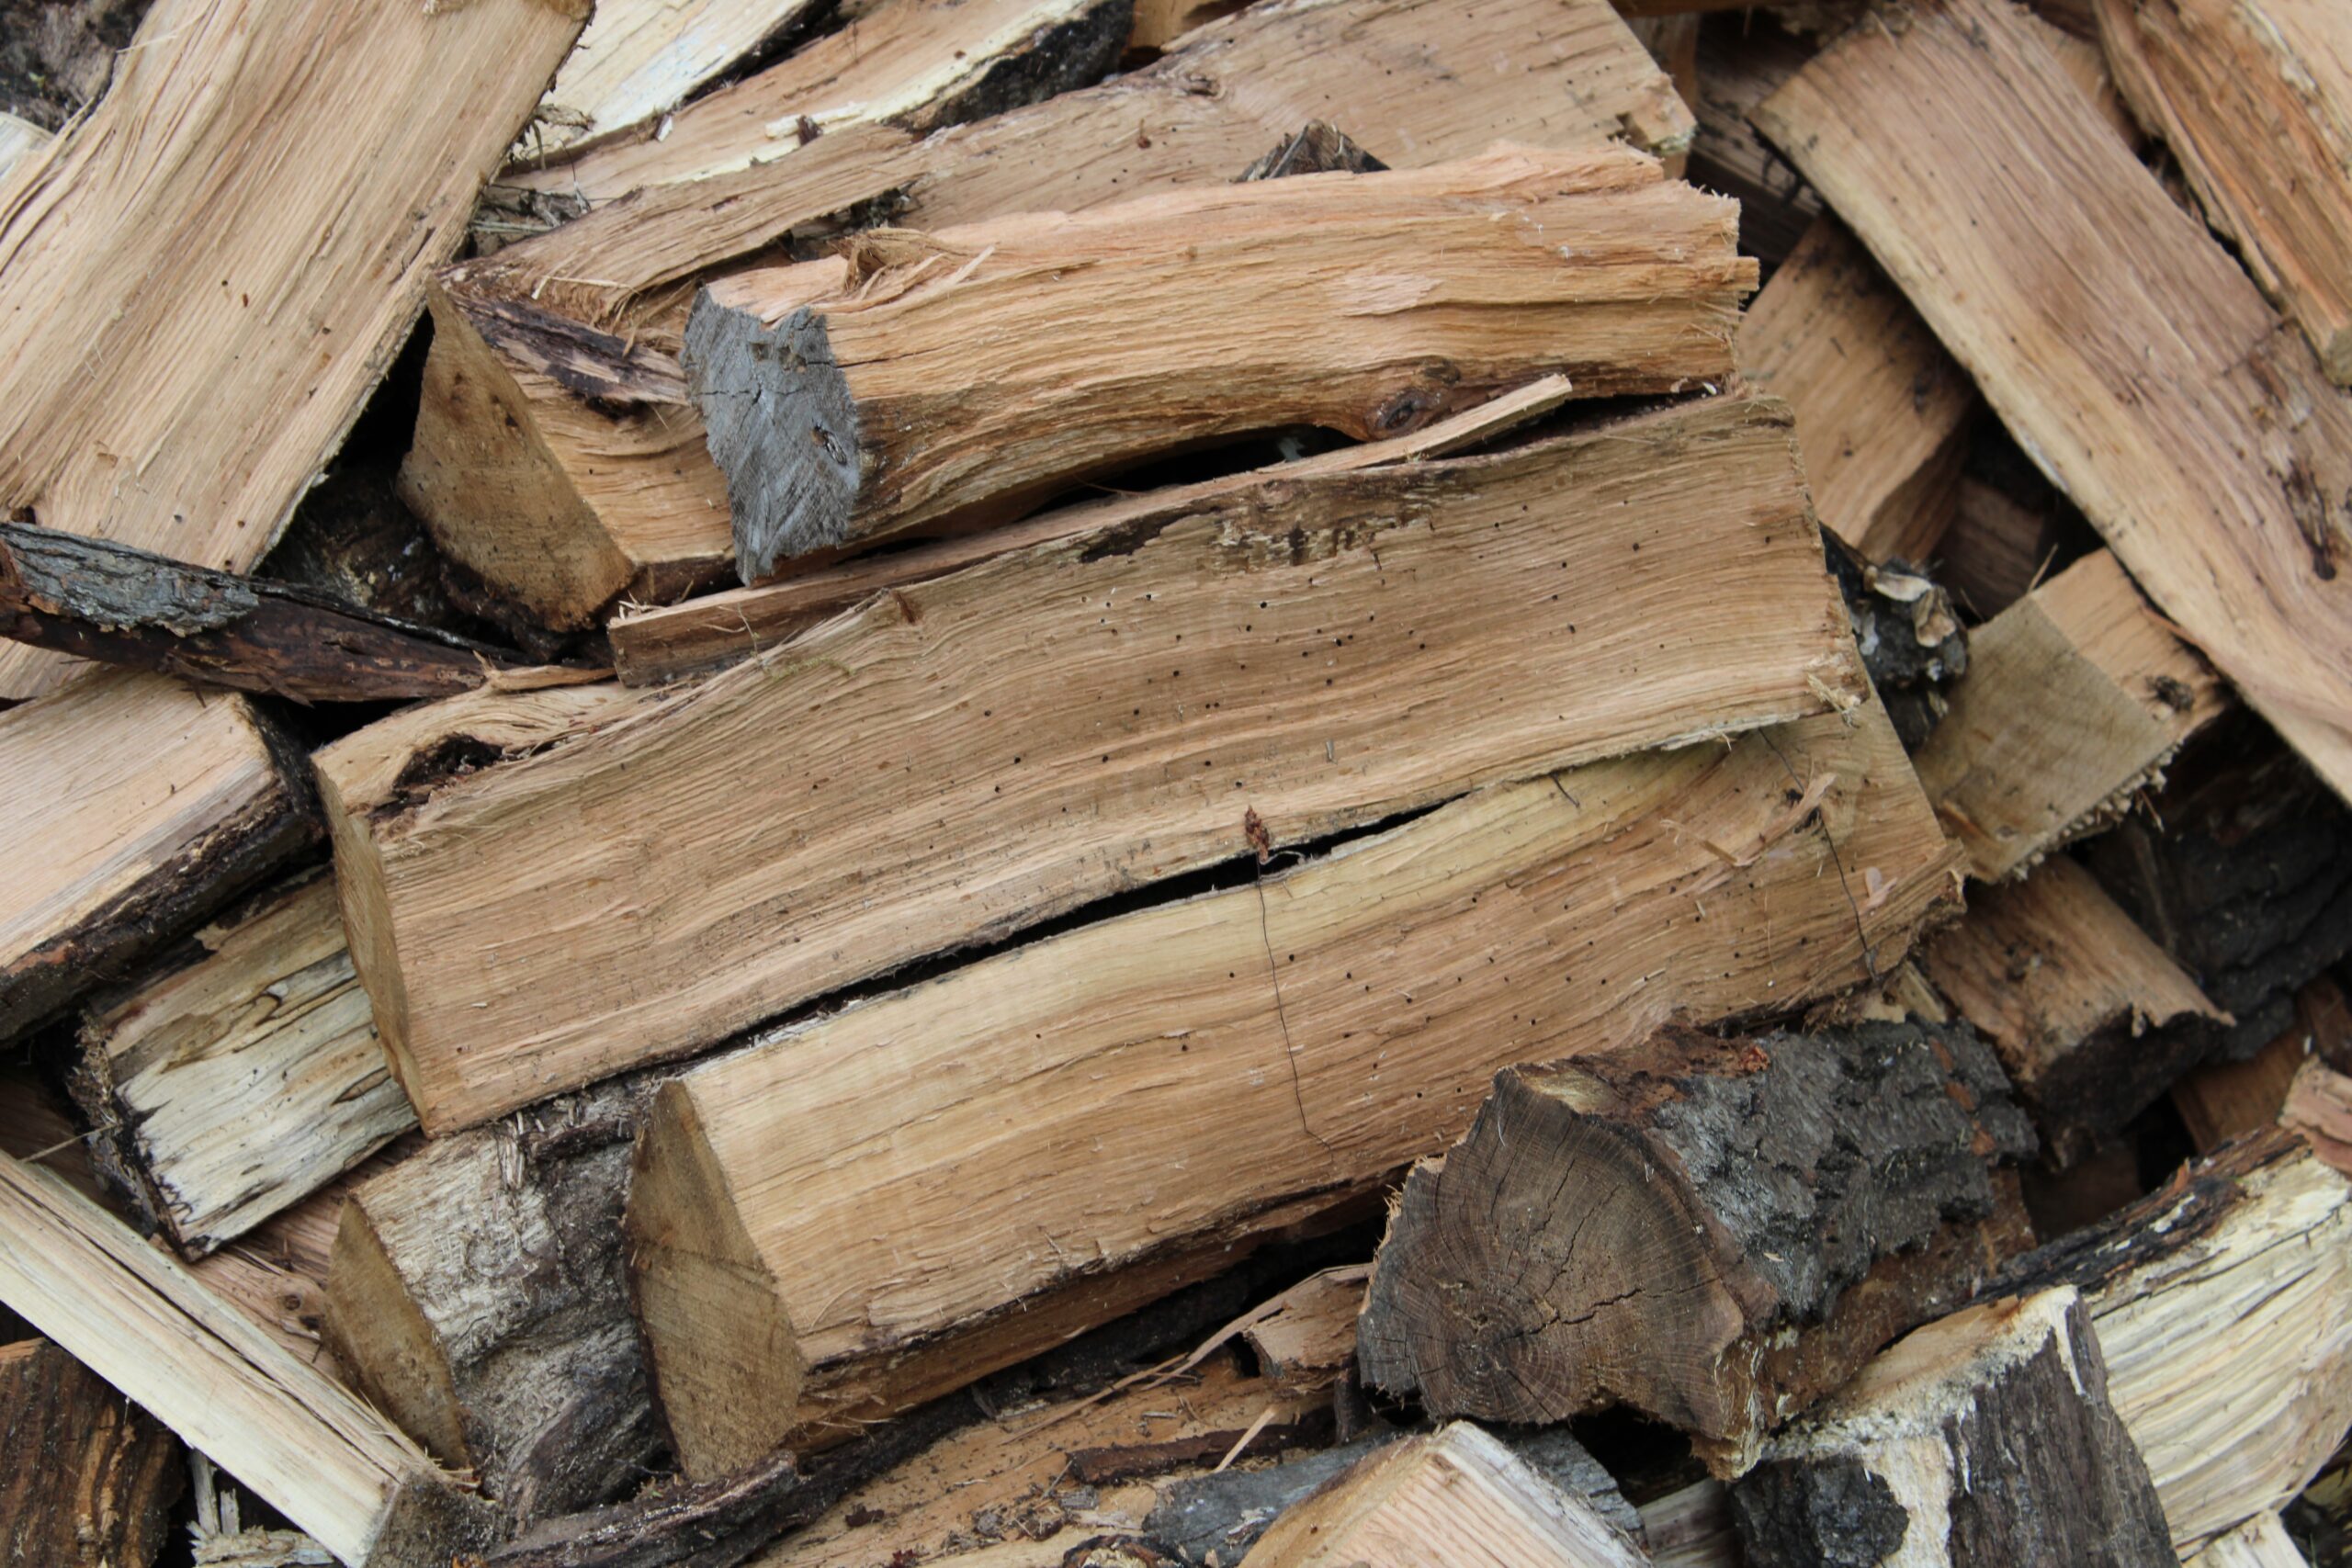 gorrin bel Geezmr1UMPs unsplash scaled If you're looking for a good firewood source, consider using oak. This type of wood is dense and produces a great deal of heat. It's also cheaper and easier to split than the ones you can find at https://www.cuttingedgefirewood.com/cooking-firewood/smoking-chunks/. In addition, oak firewood produces less black smoke than other types of firewood. This makes it a great choice for any outdoor fire.